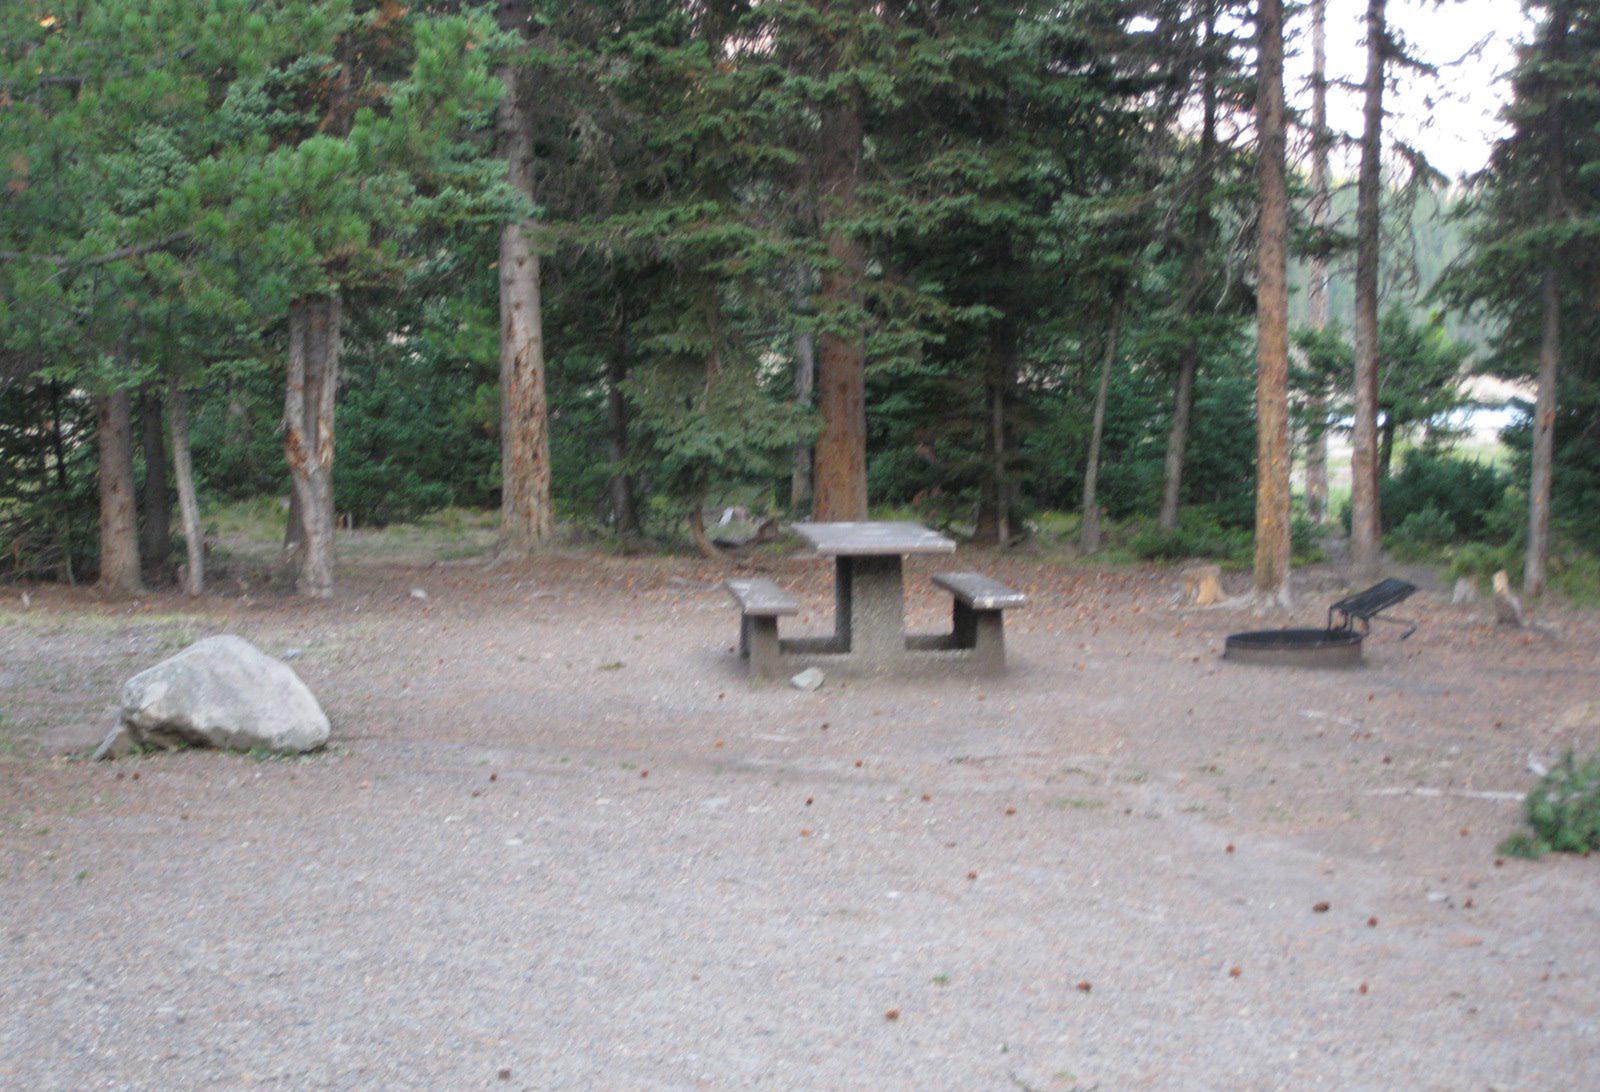 Site 5, campsite surrounded by pine trees, picnic table & fire ringSite 5